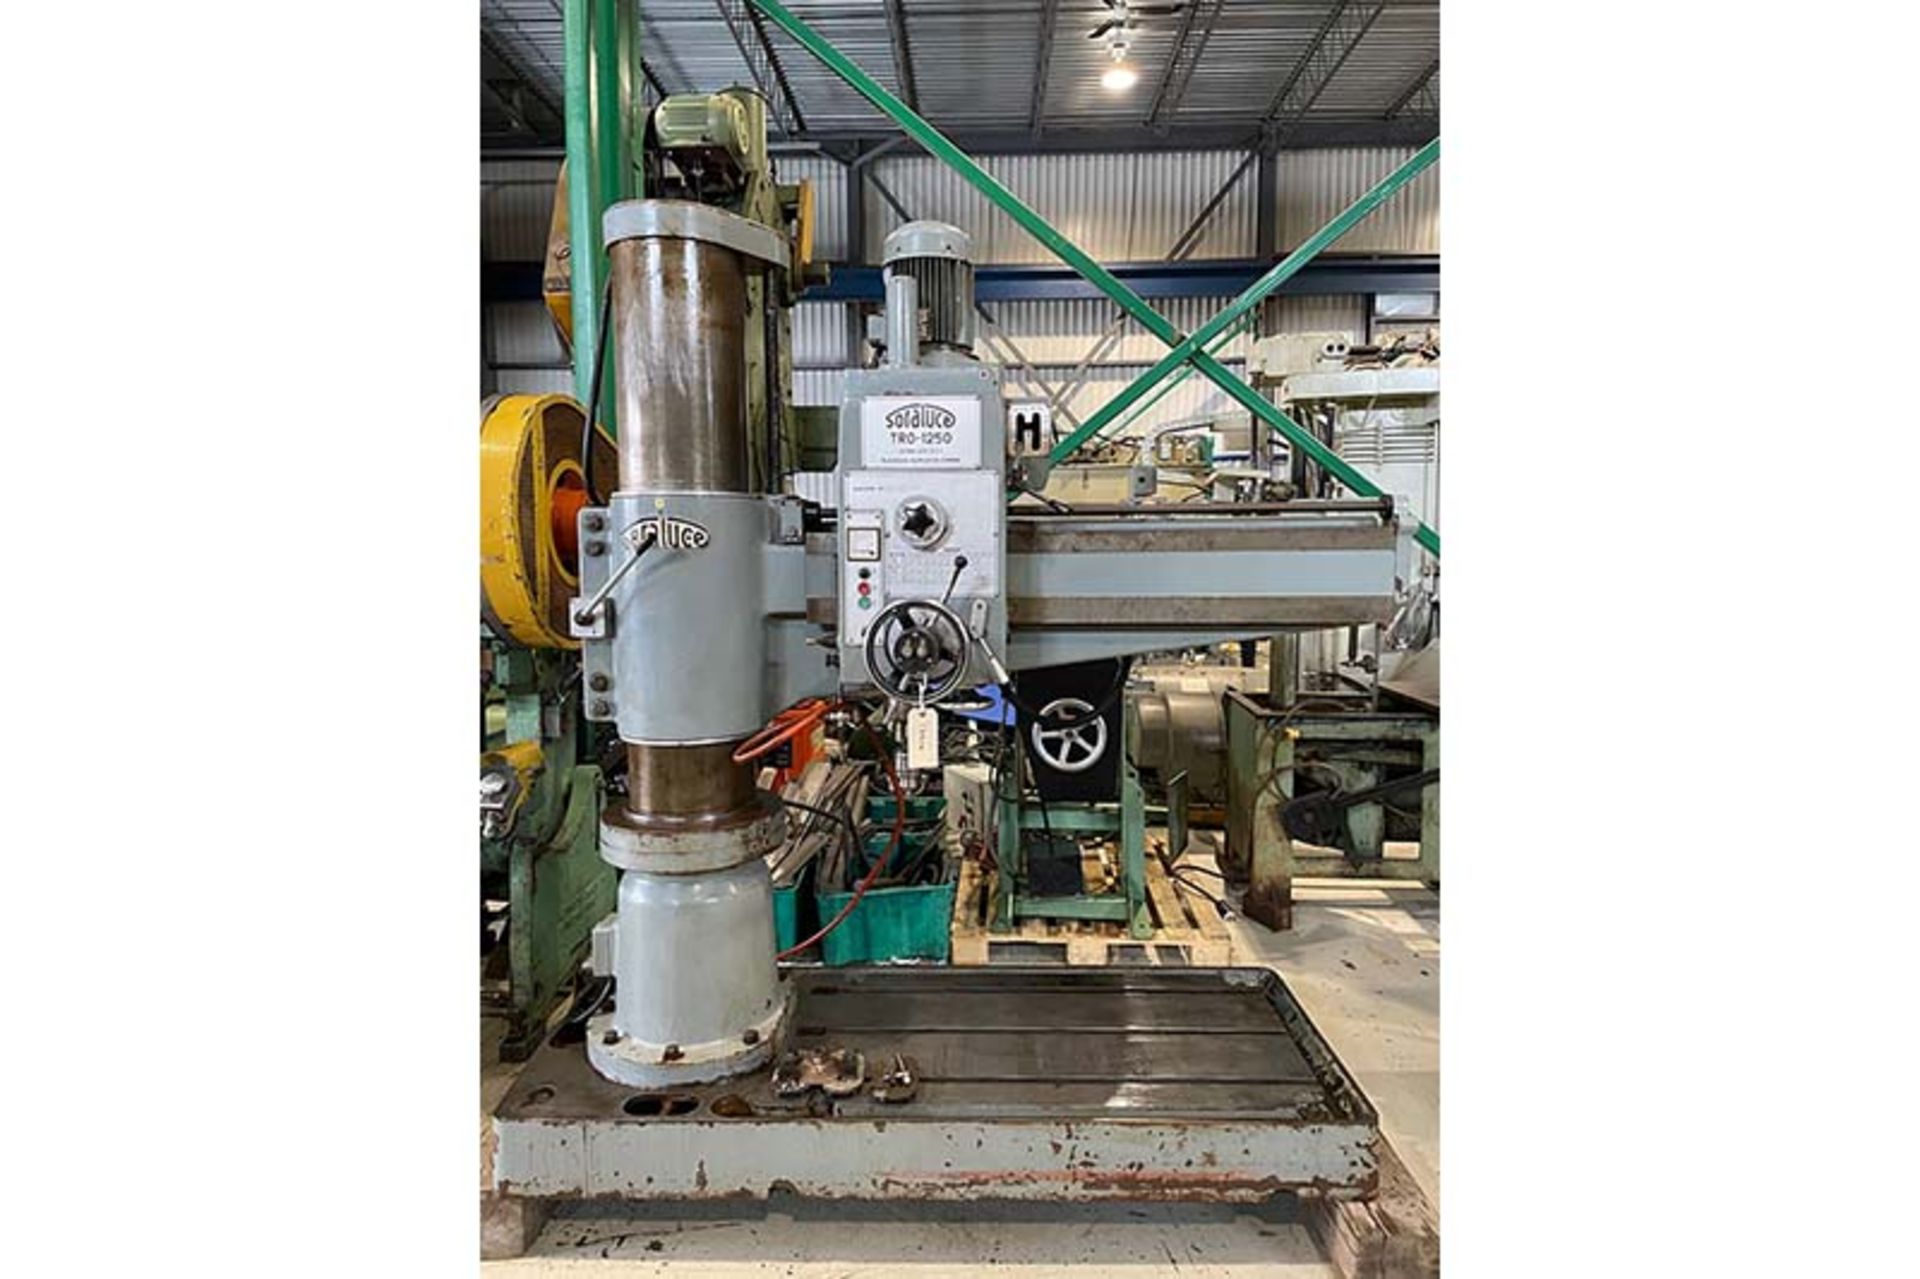 SORALUCE RADIAL DRILL, MDL TRO-1250-15030, S/N 3195 1028, 48'', LOCATION, MONTREAL, QUEBEC - Image 2 of 5